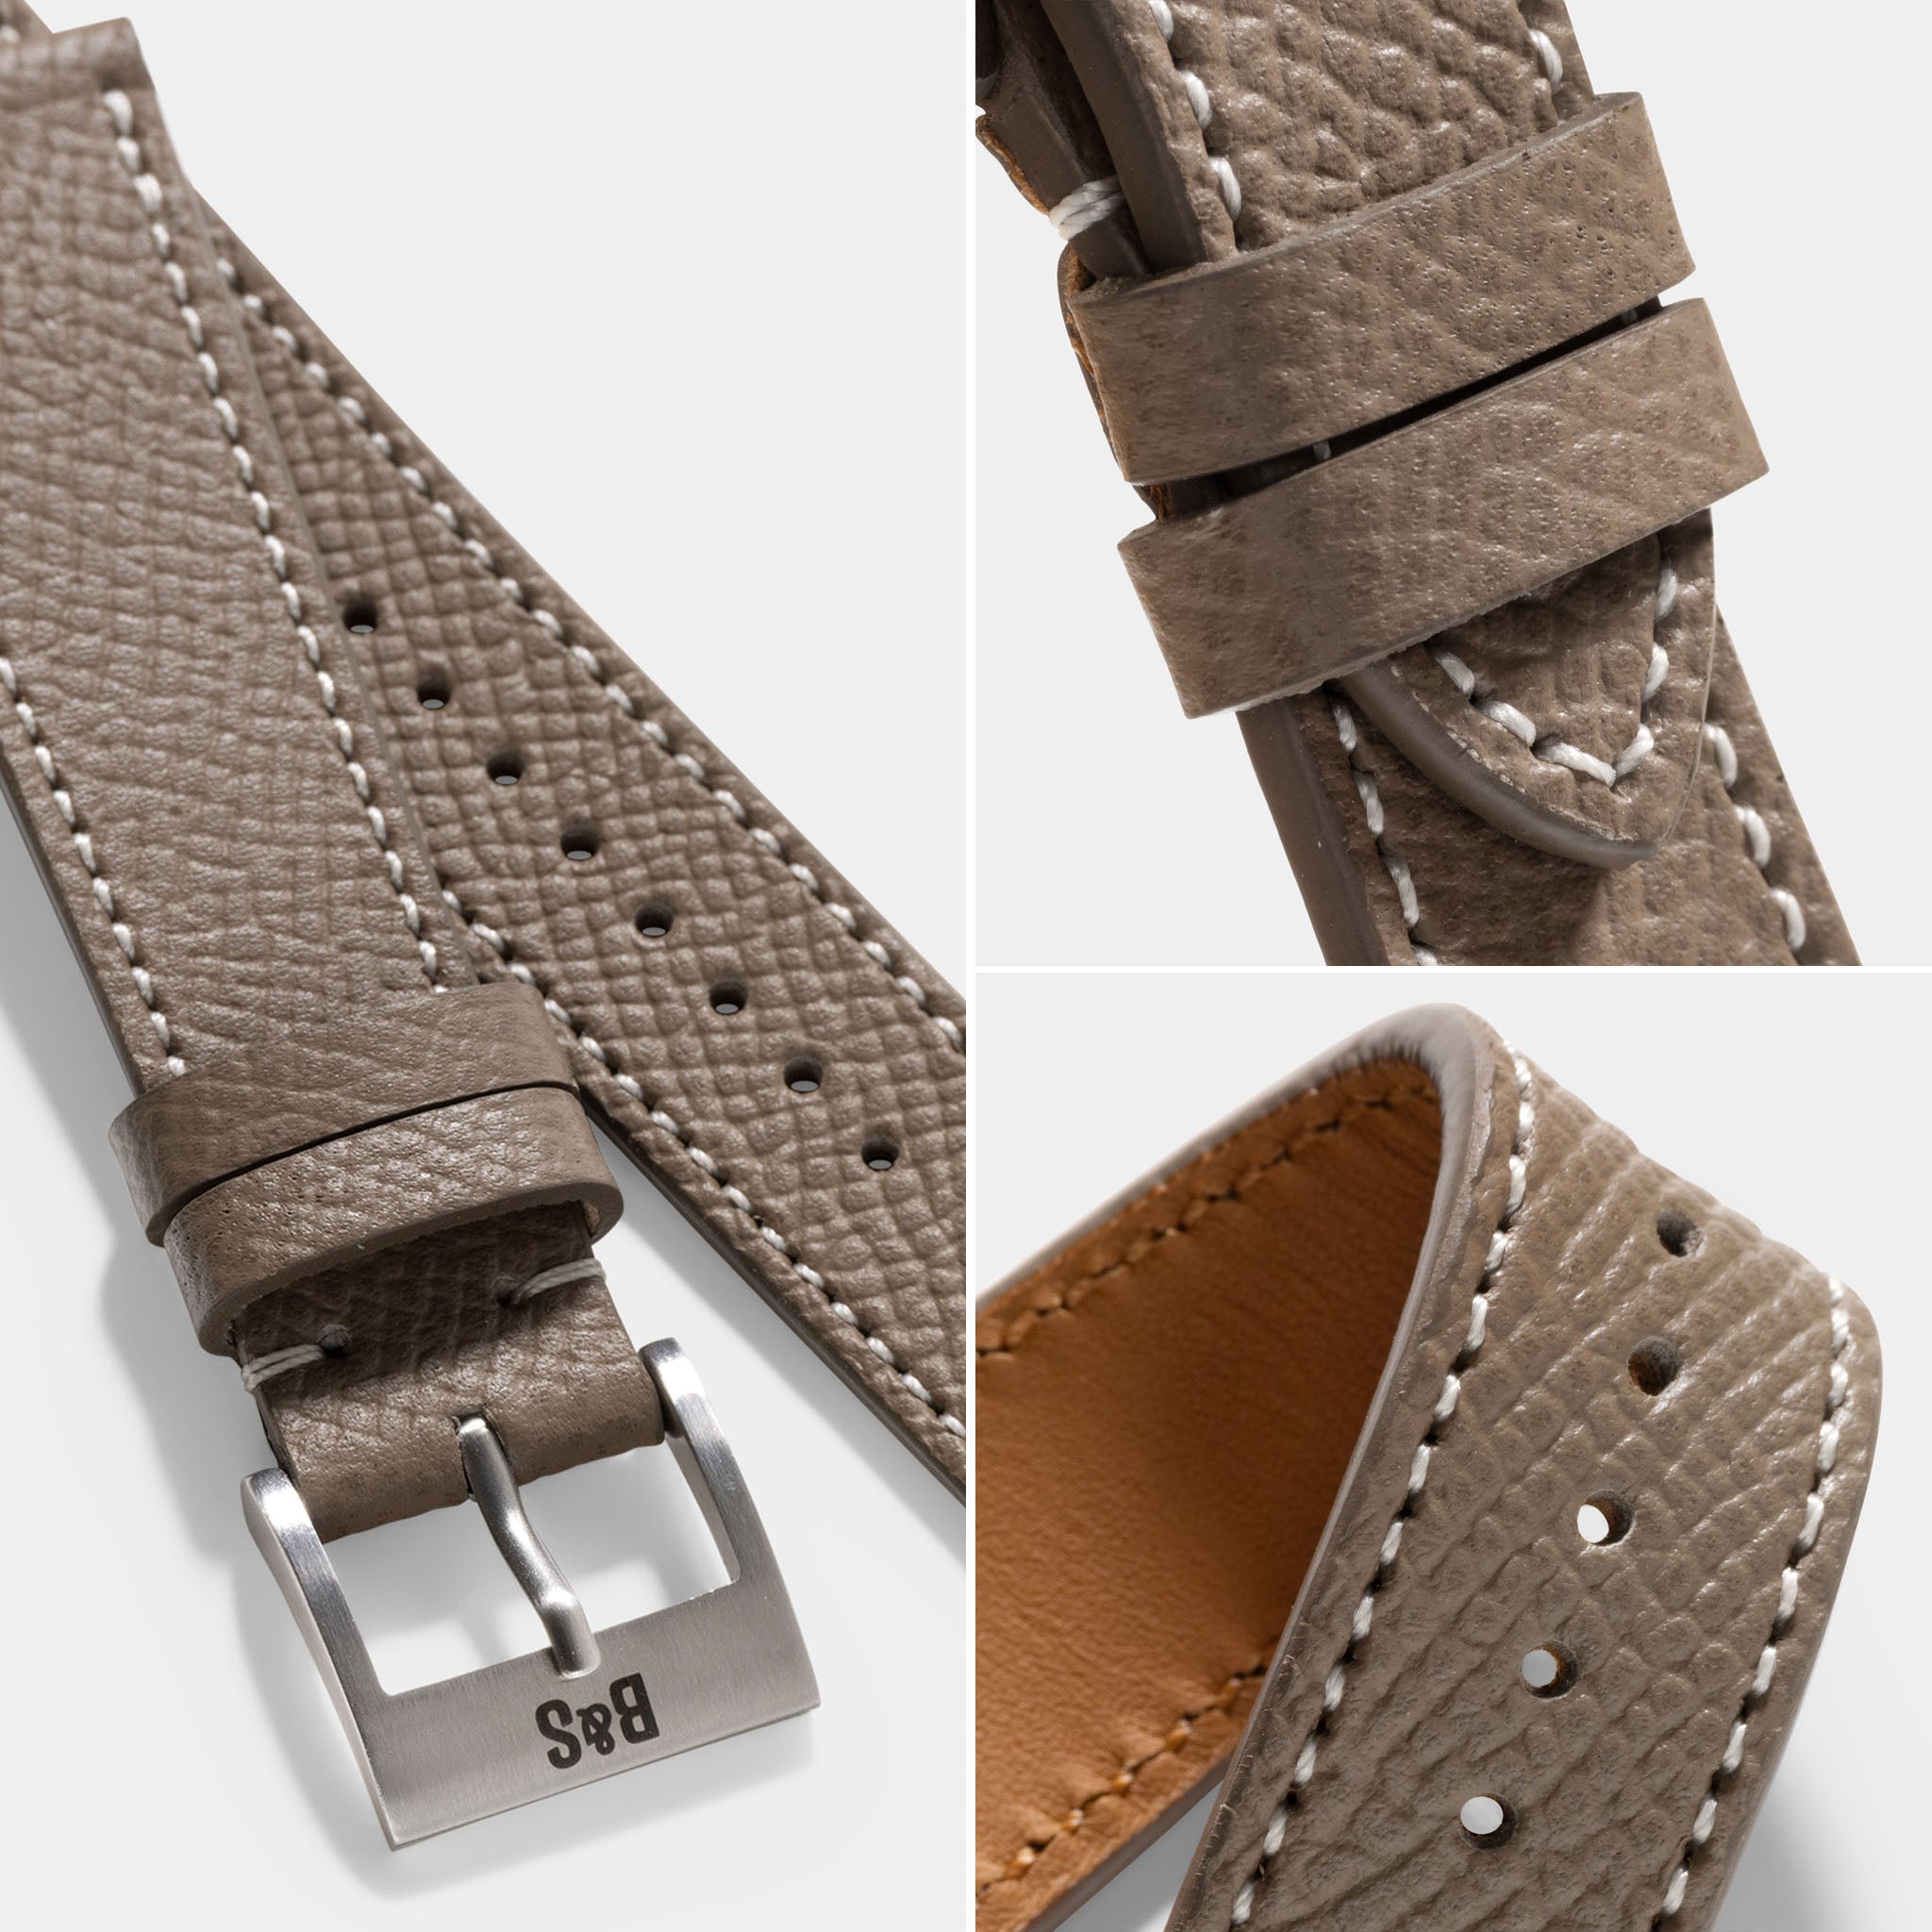 Epsom Taupe Grey Leather Watch Strap